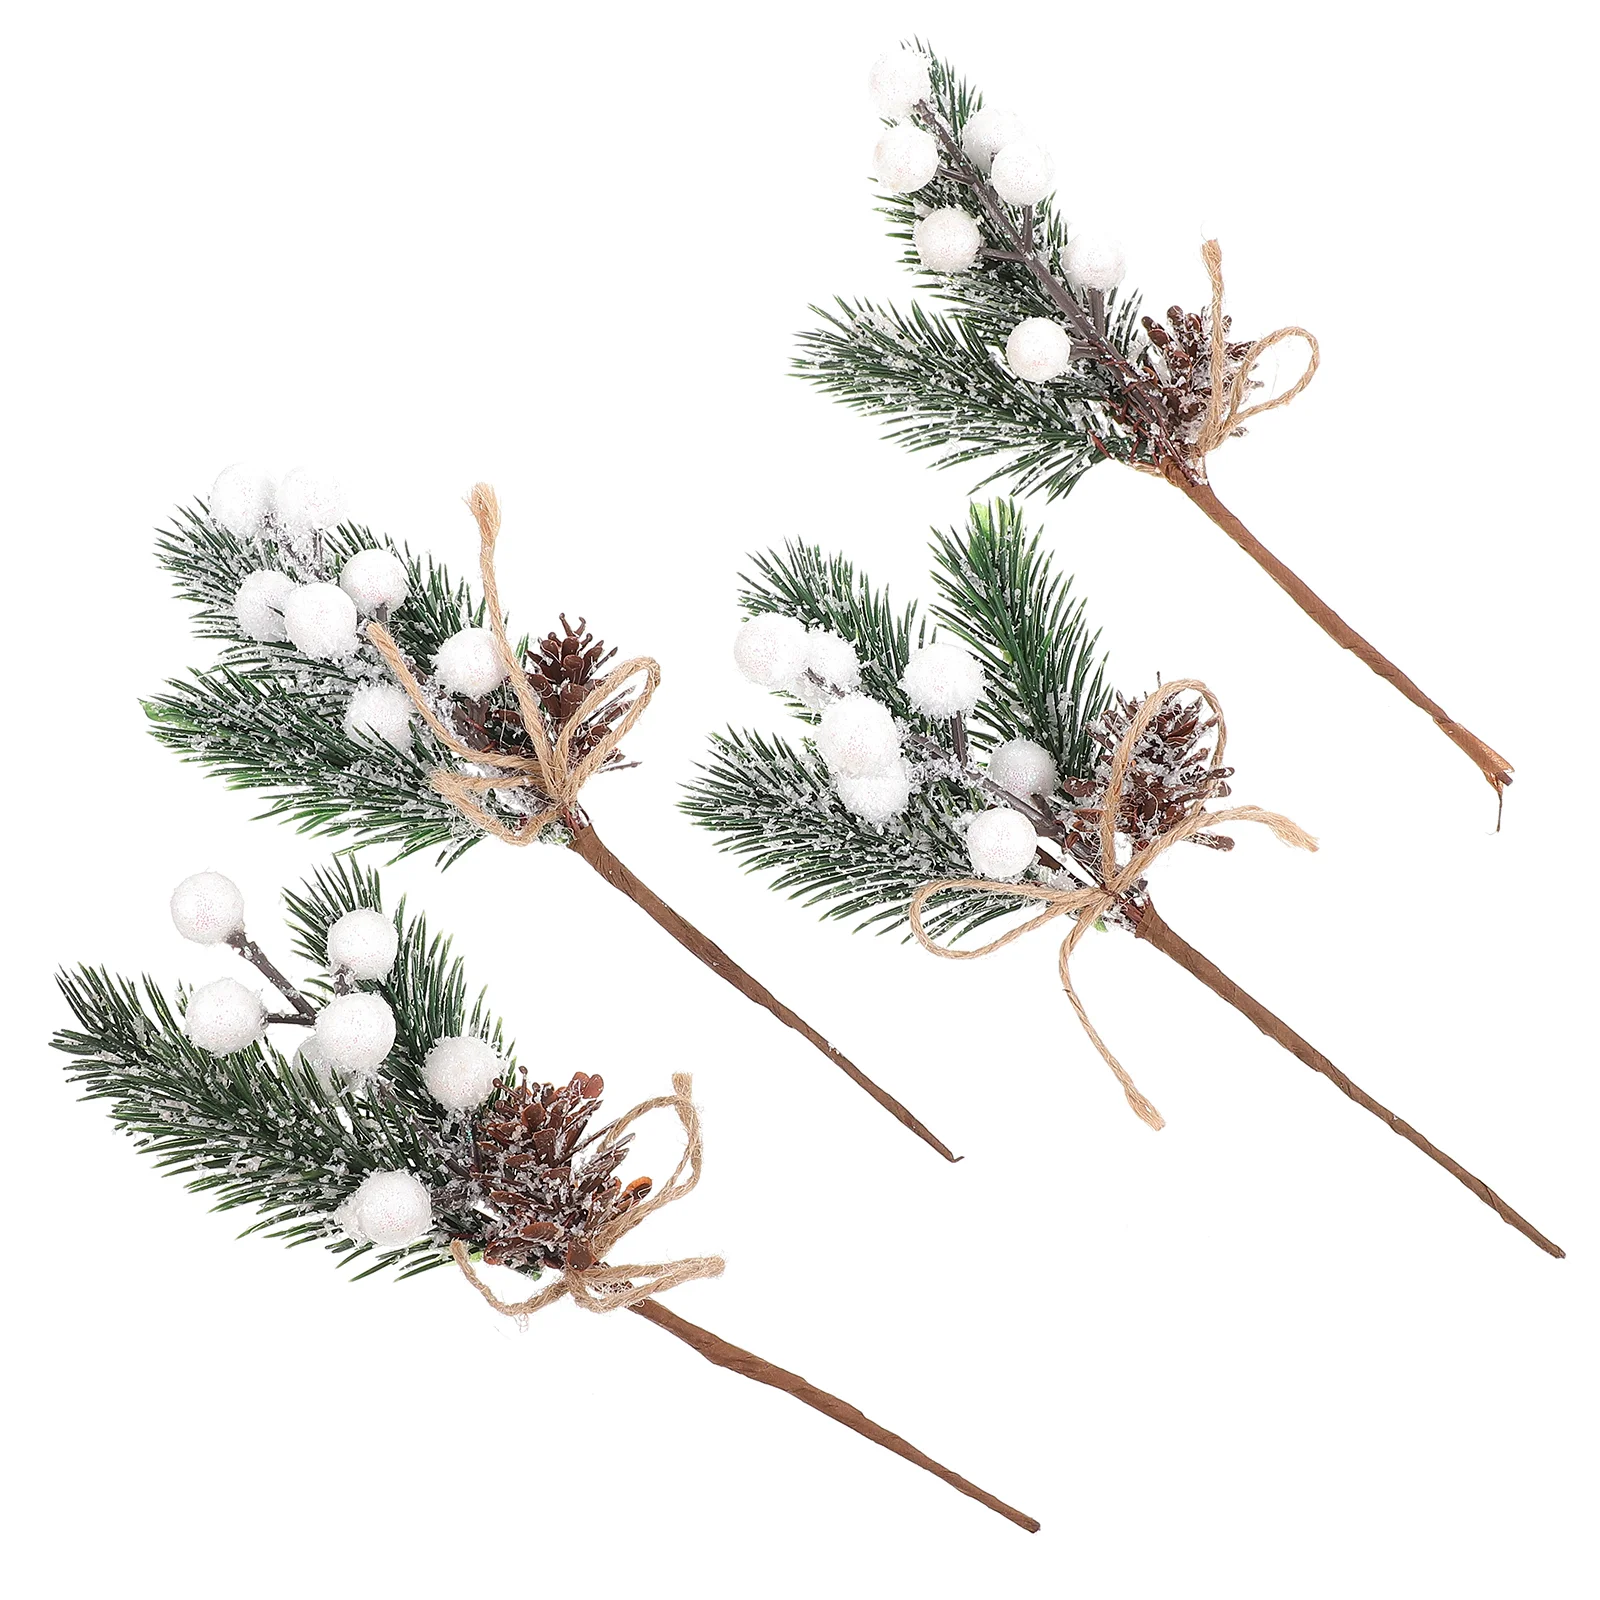 

20 Pcs Light House Decorations Home Christmas Berry Pine Needles Xmas Cones Simulation Tree Props Branch Berries Ornament Picks